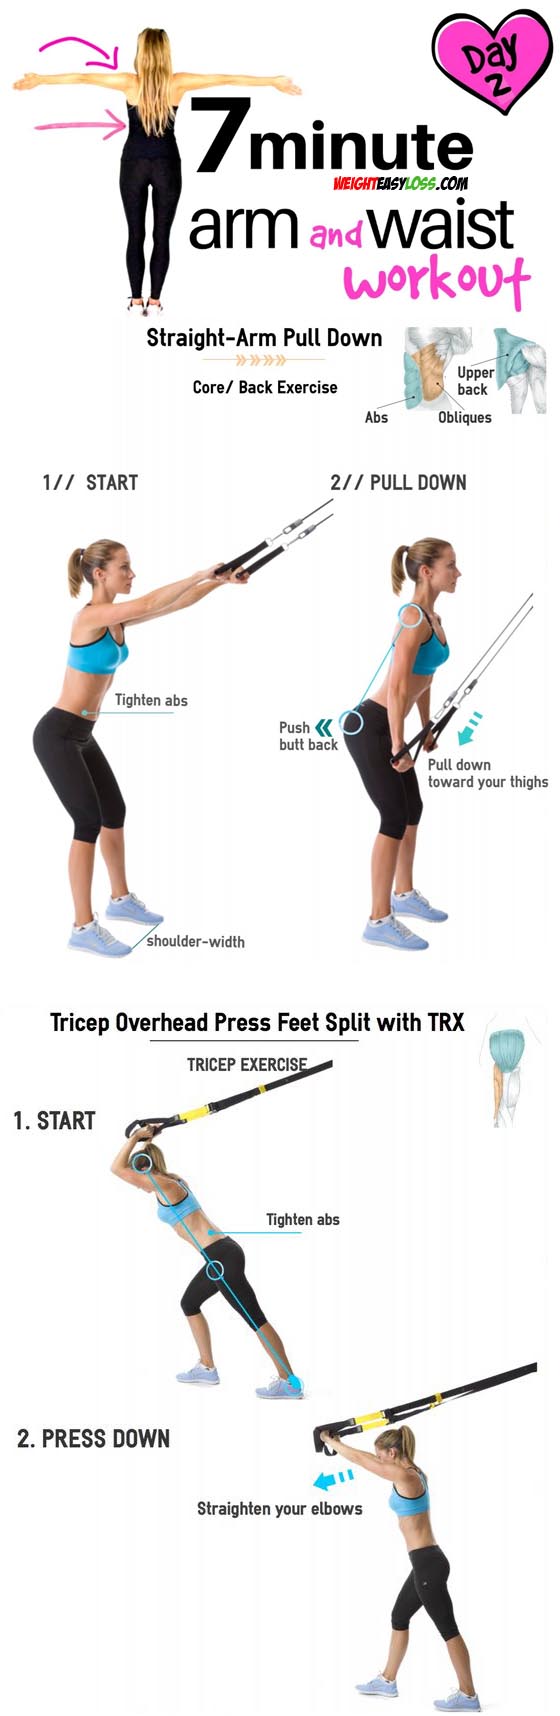 Tone your Arm and Waist with this Workout